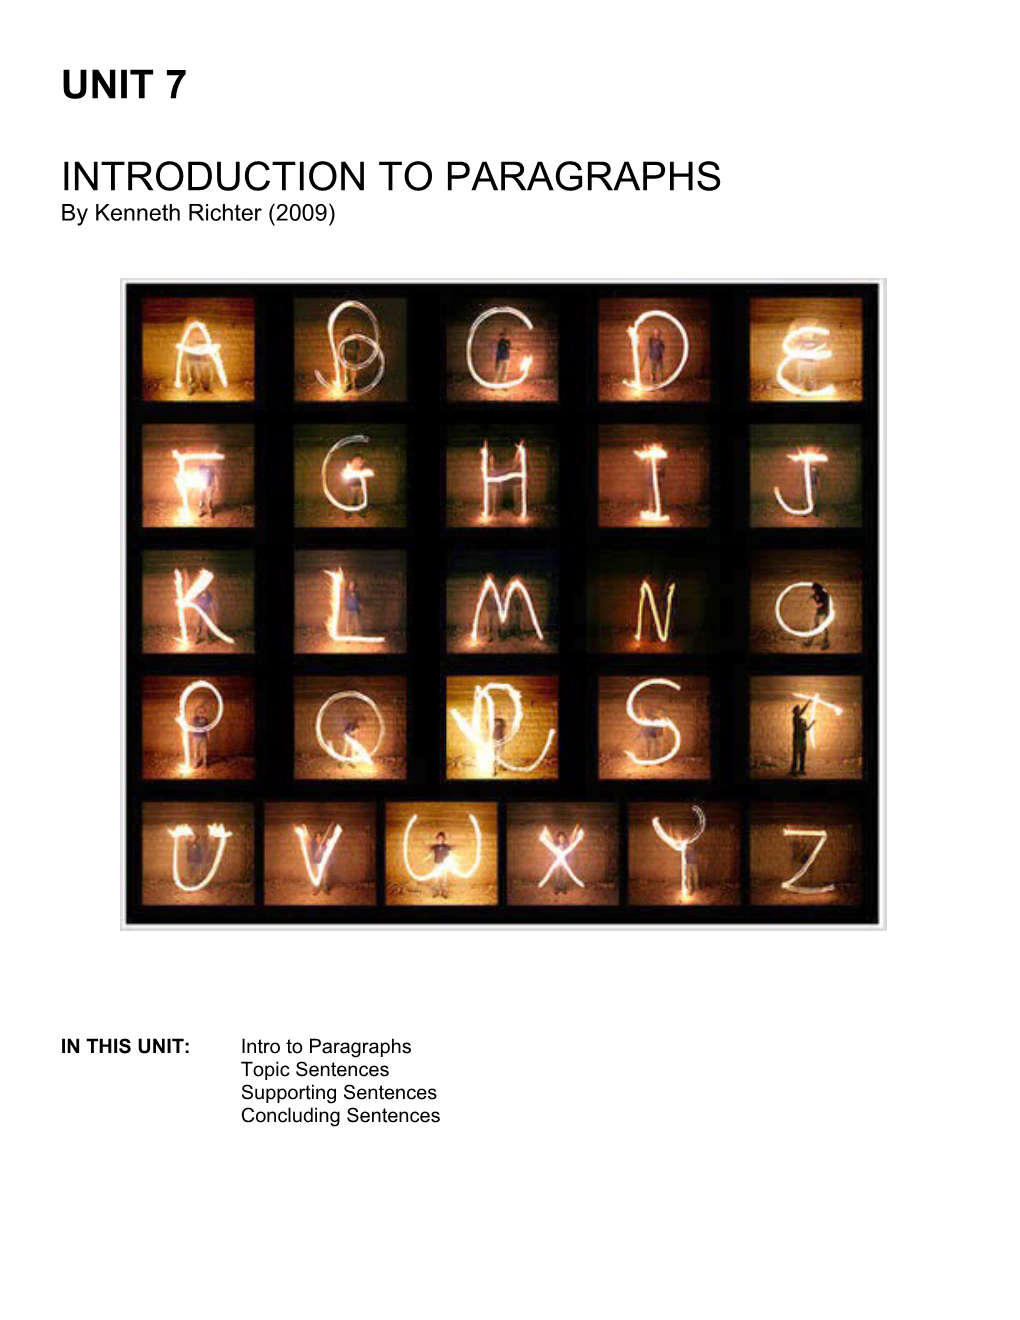 Introduction to Paragraphs